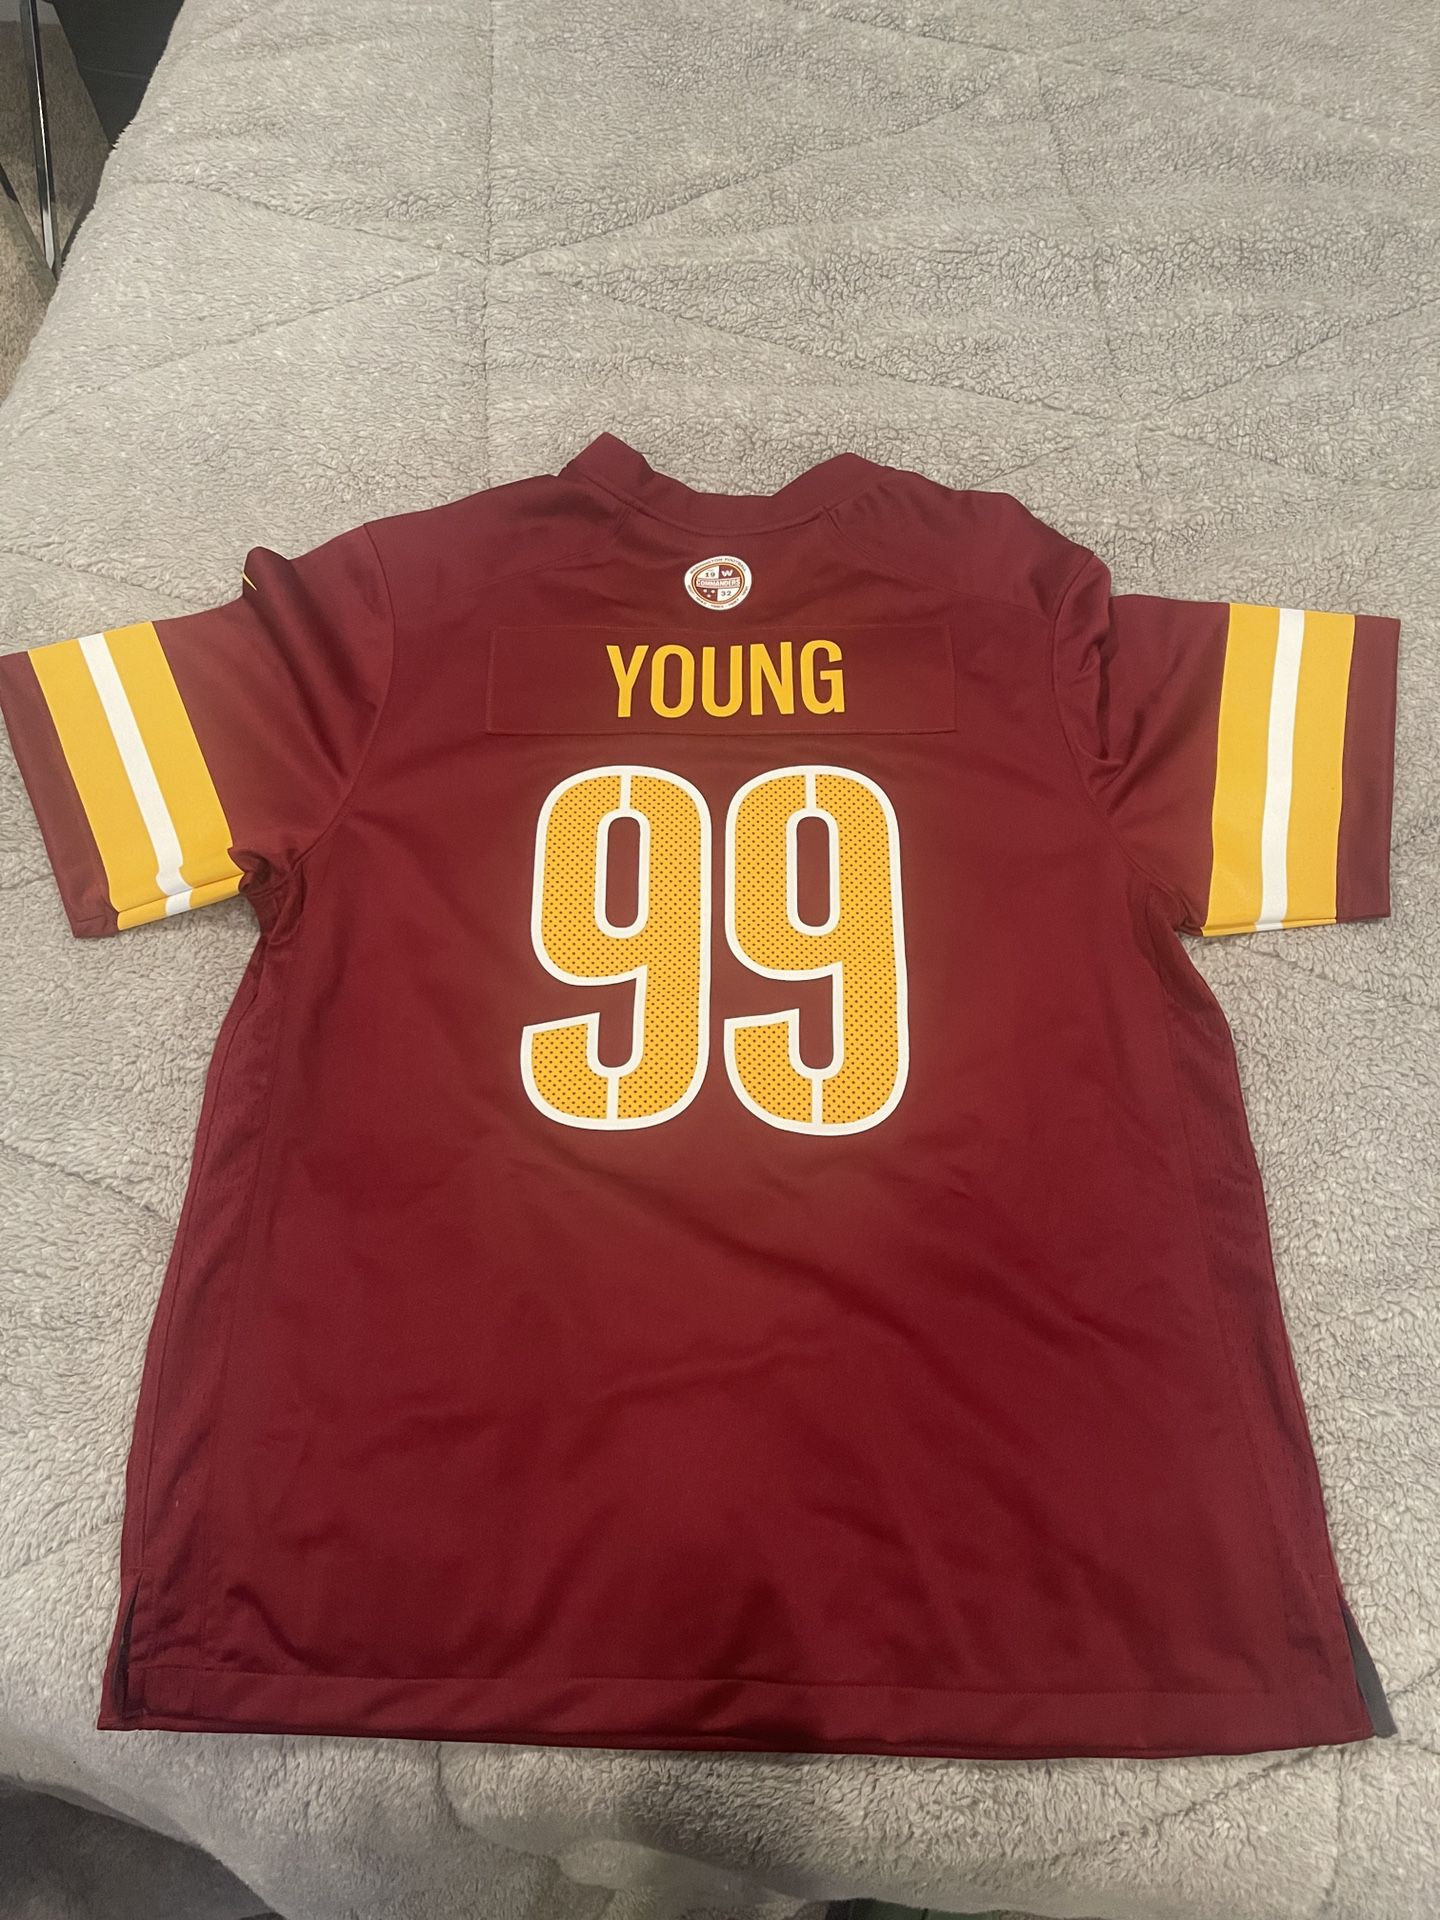  Washington Commanders Chase Young Jersey XL